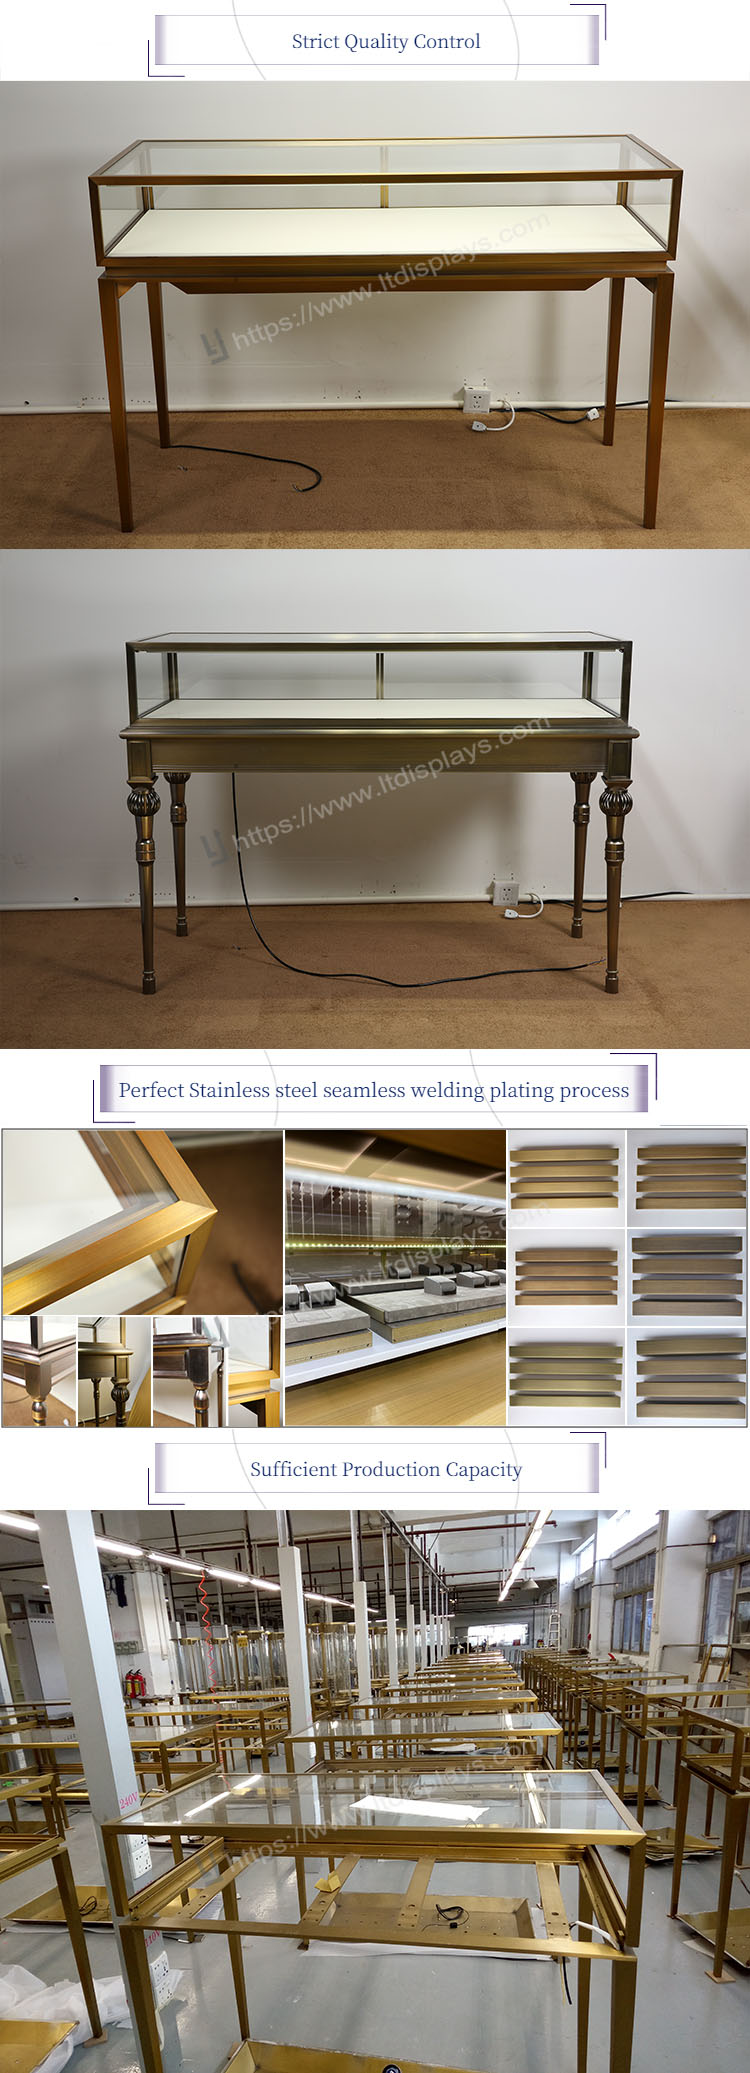 jewelry display cases for retail stores.jpg